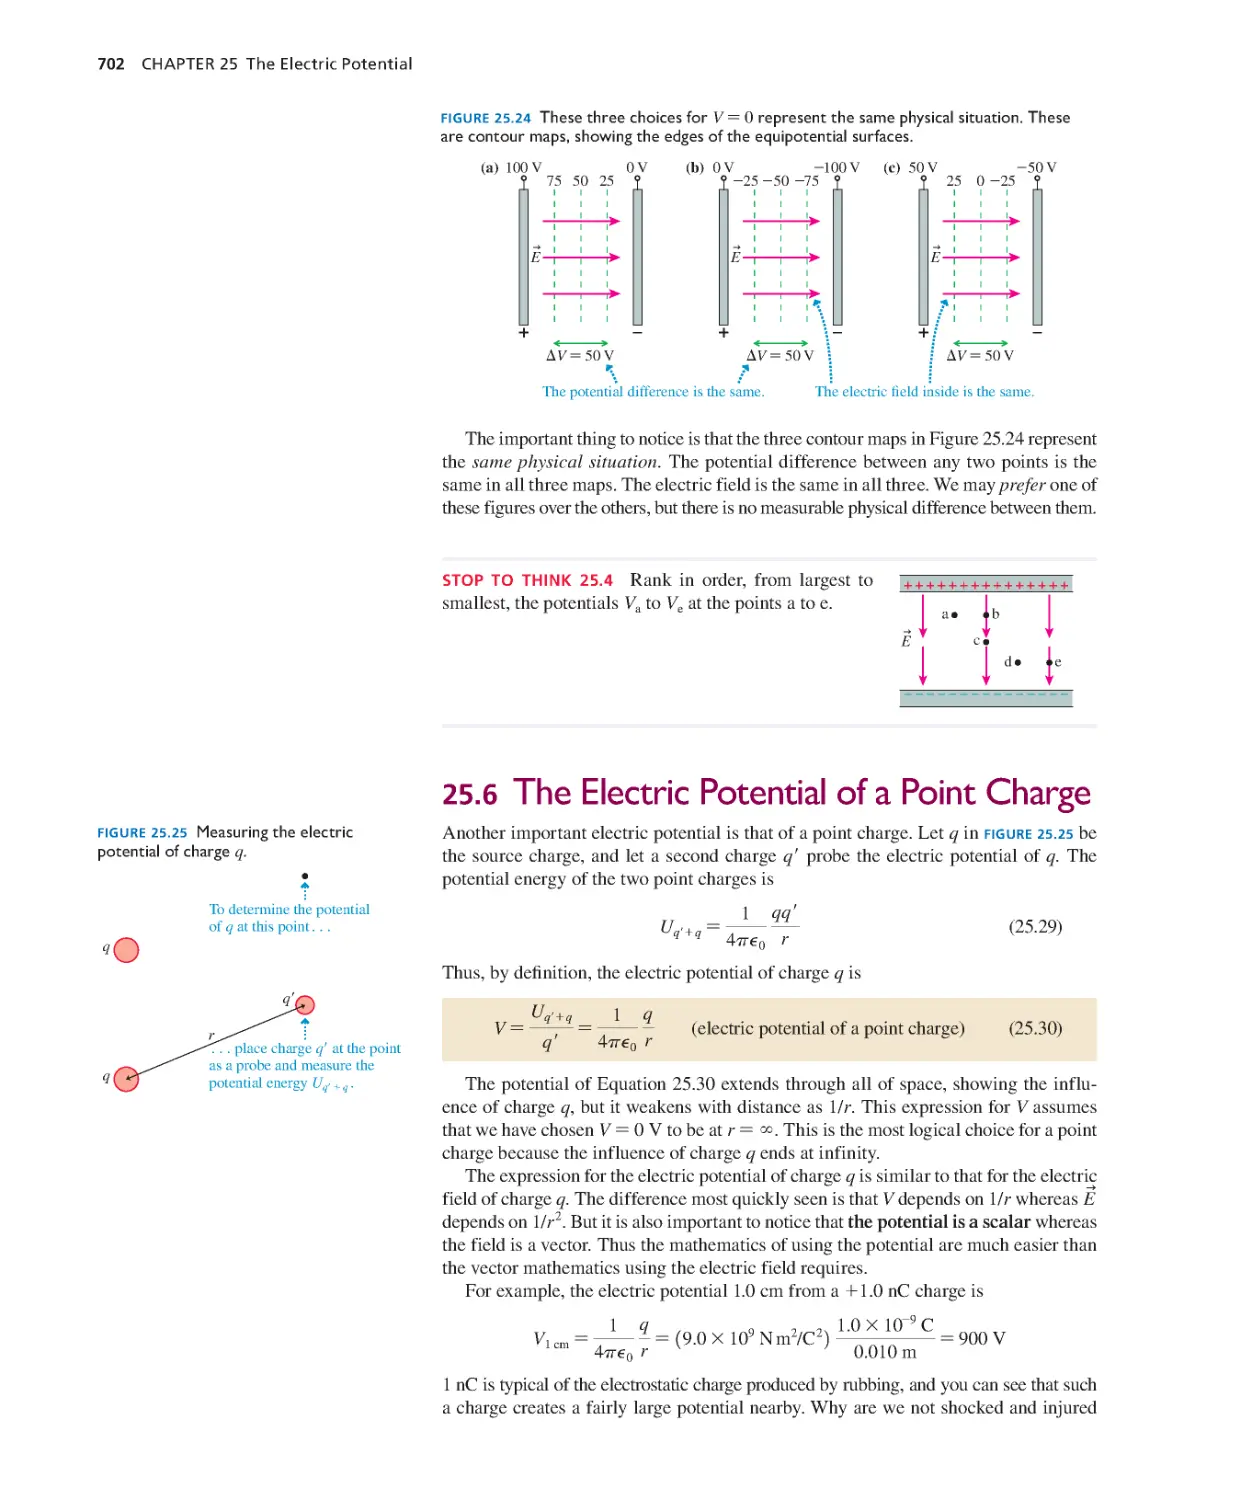 25.6. The Electric Potential of a Point Charge